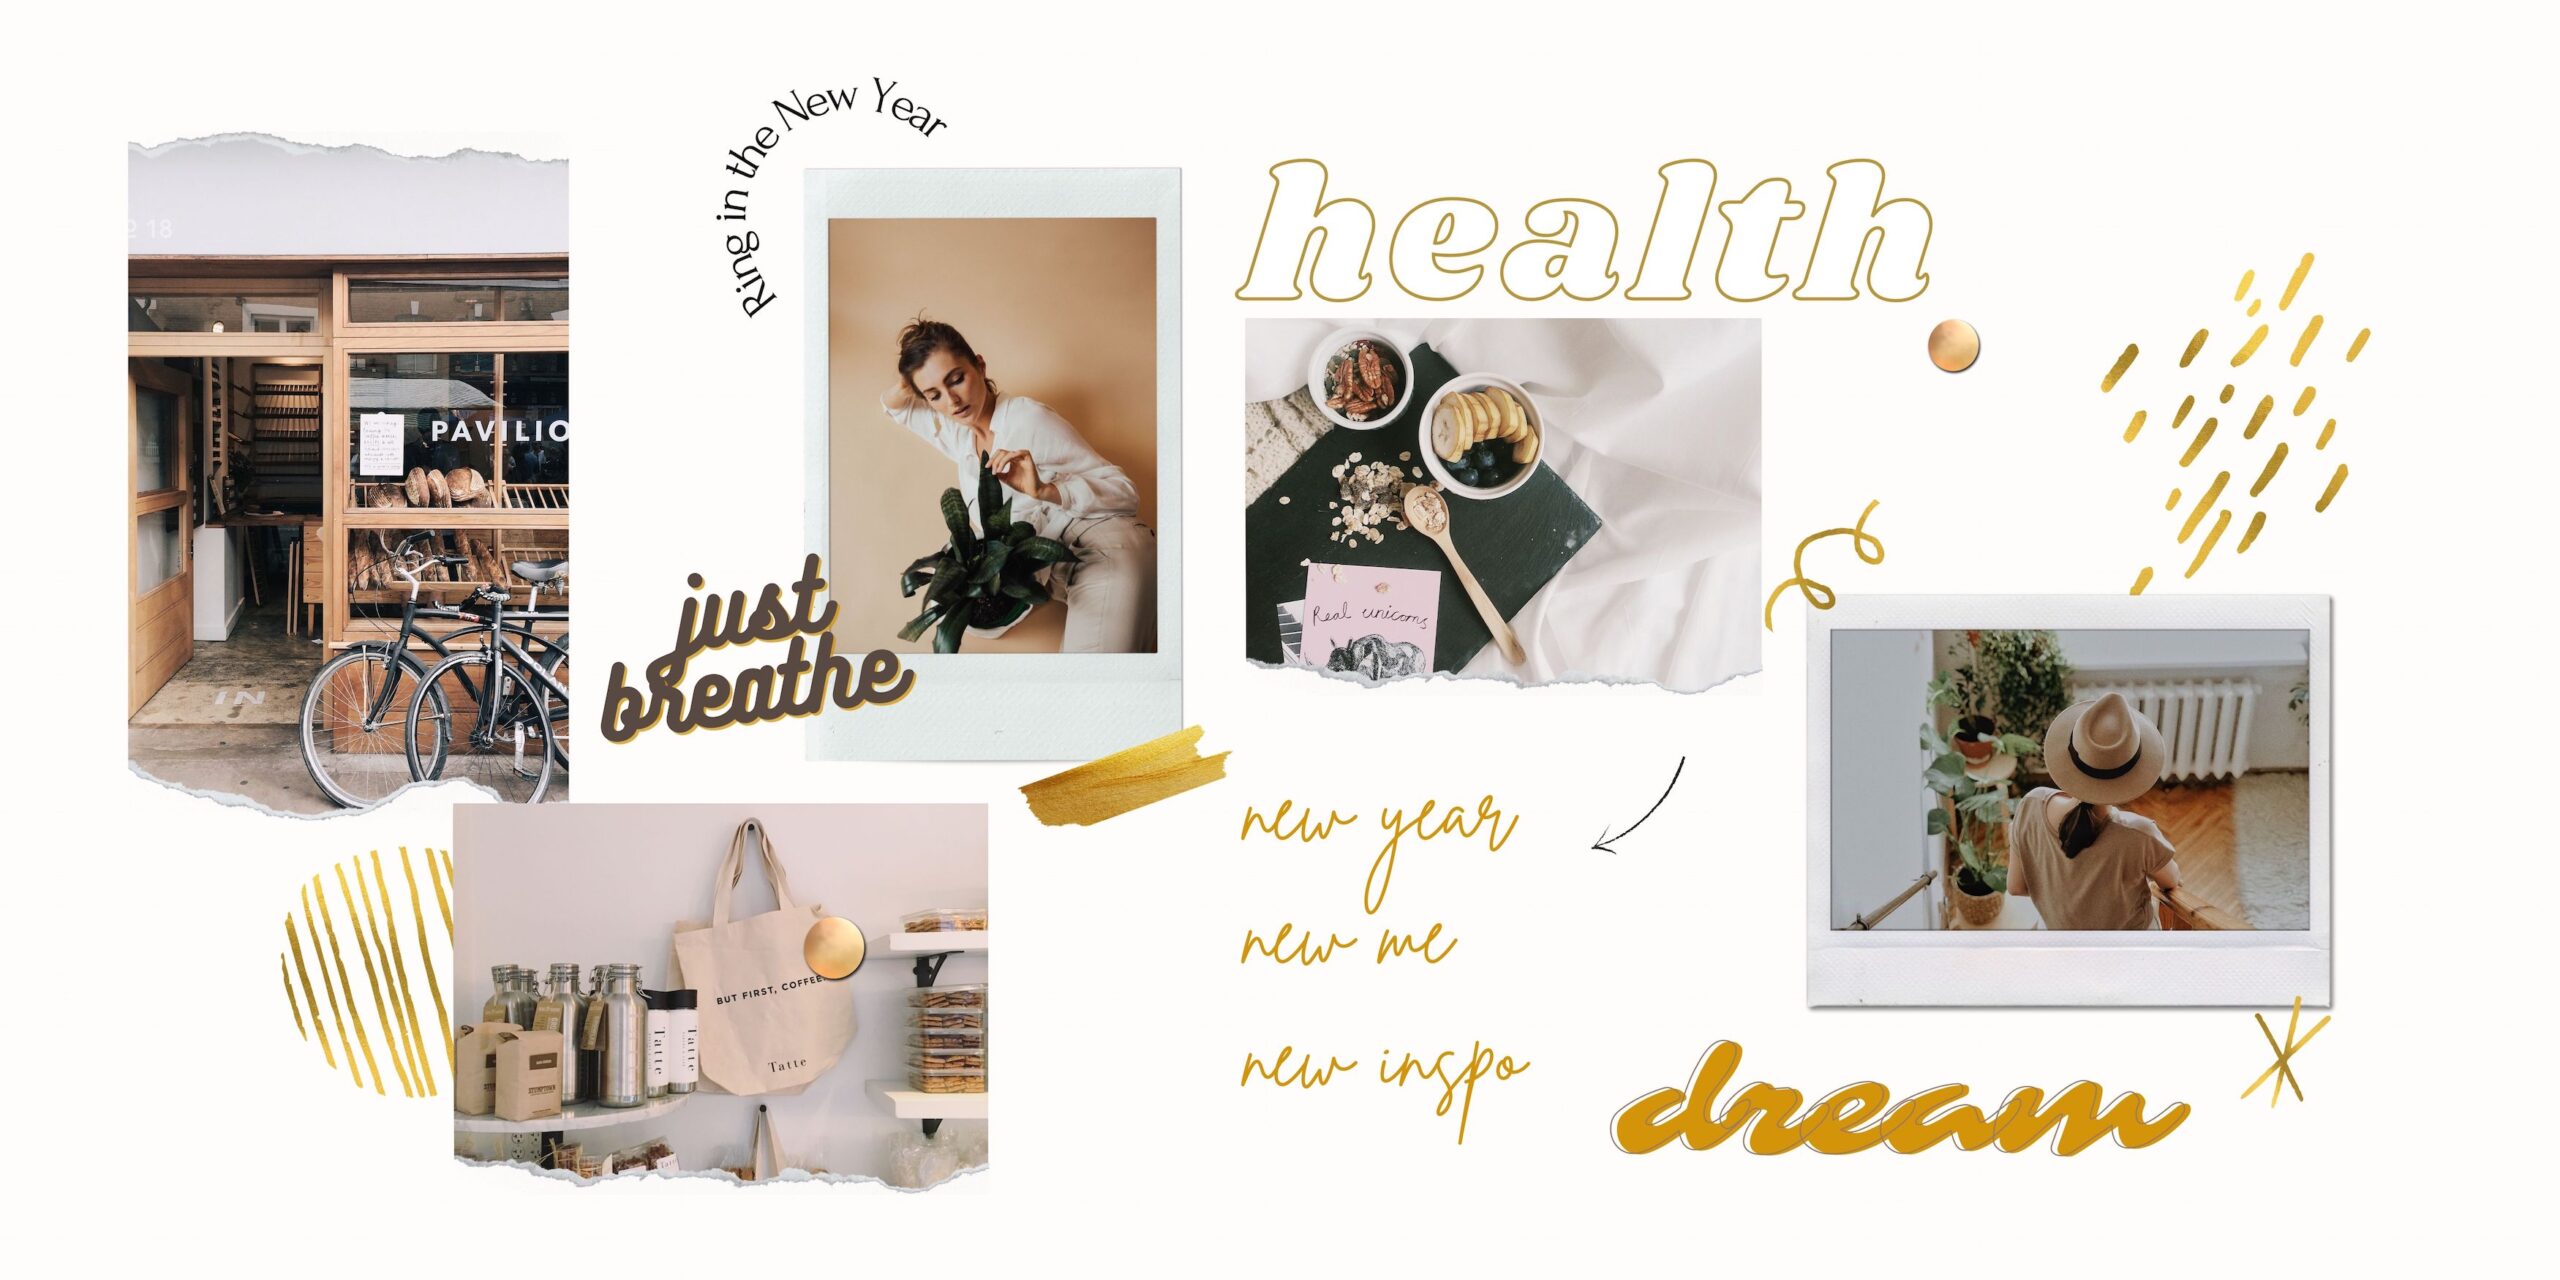 The Secret Vision Board Guide for Manifesting Your Dreams